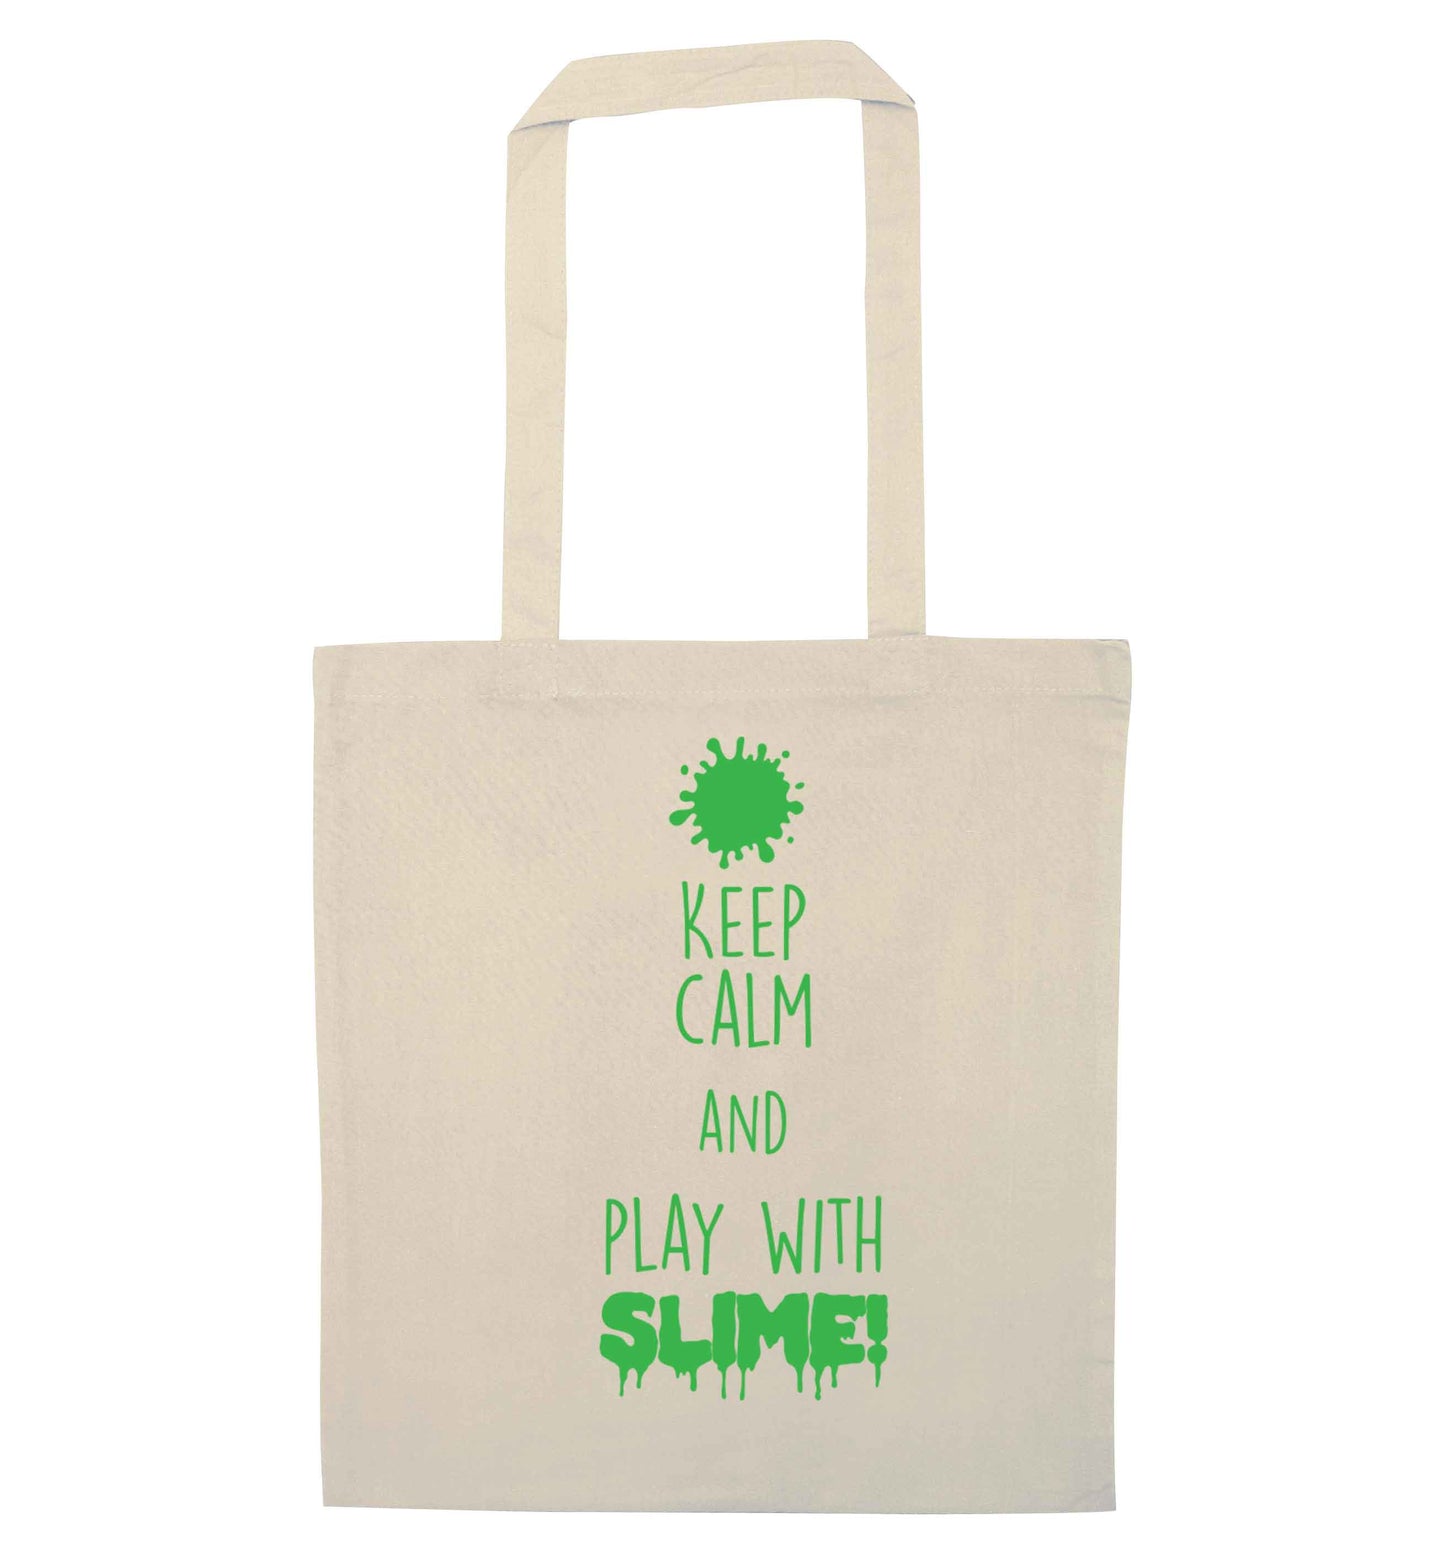 Neon green keep calm and play with slime!natural tote bag